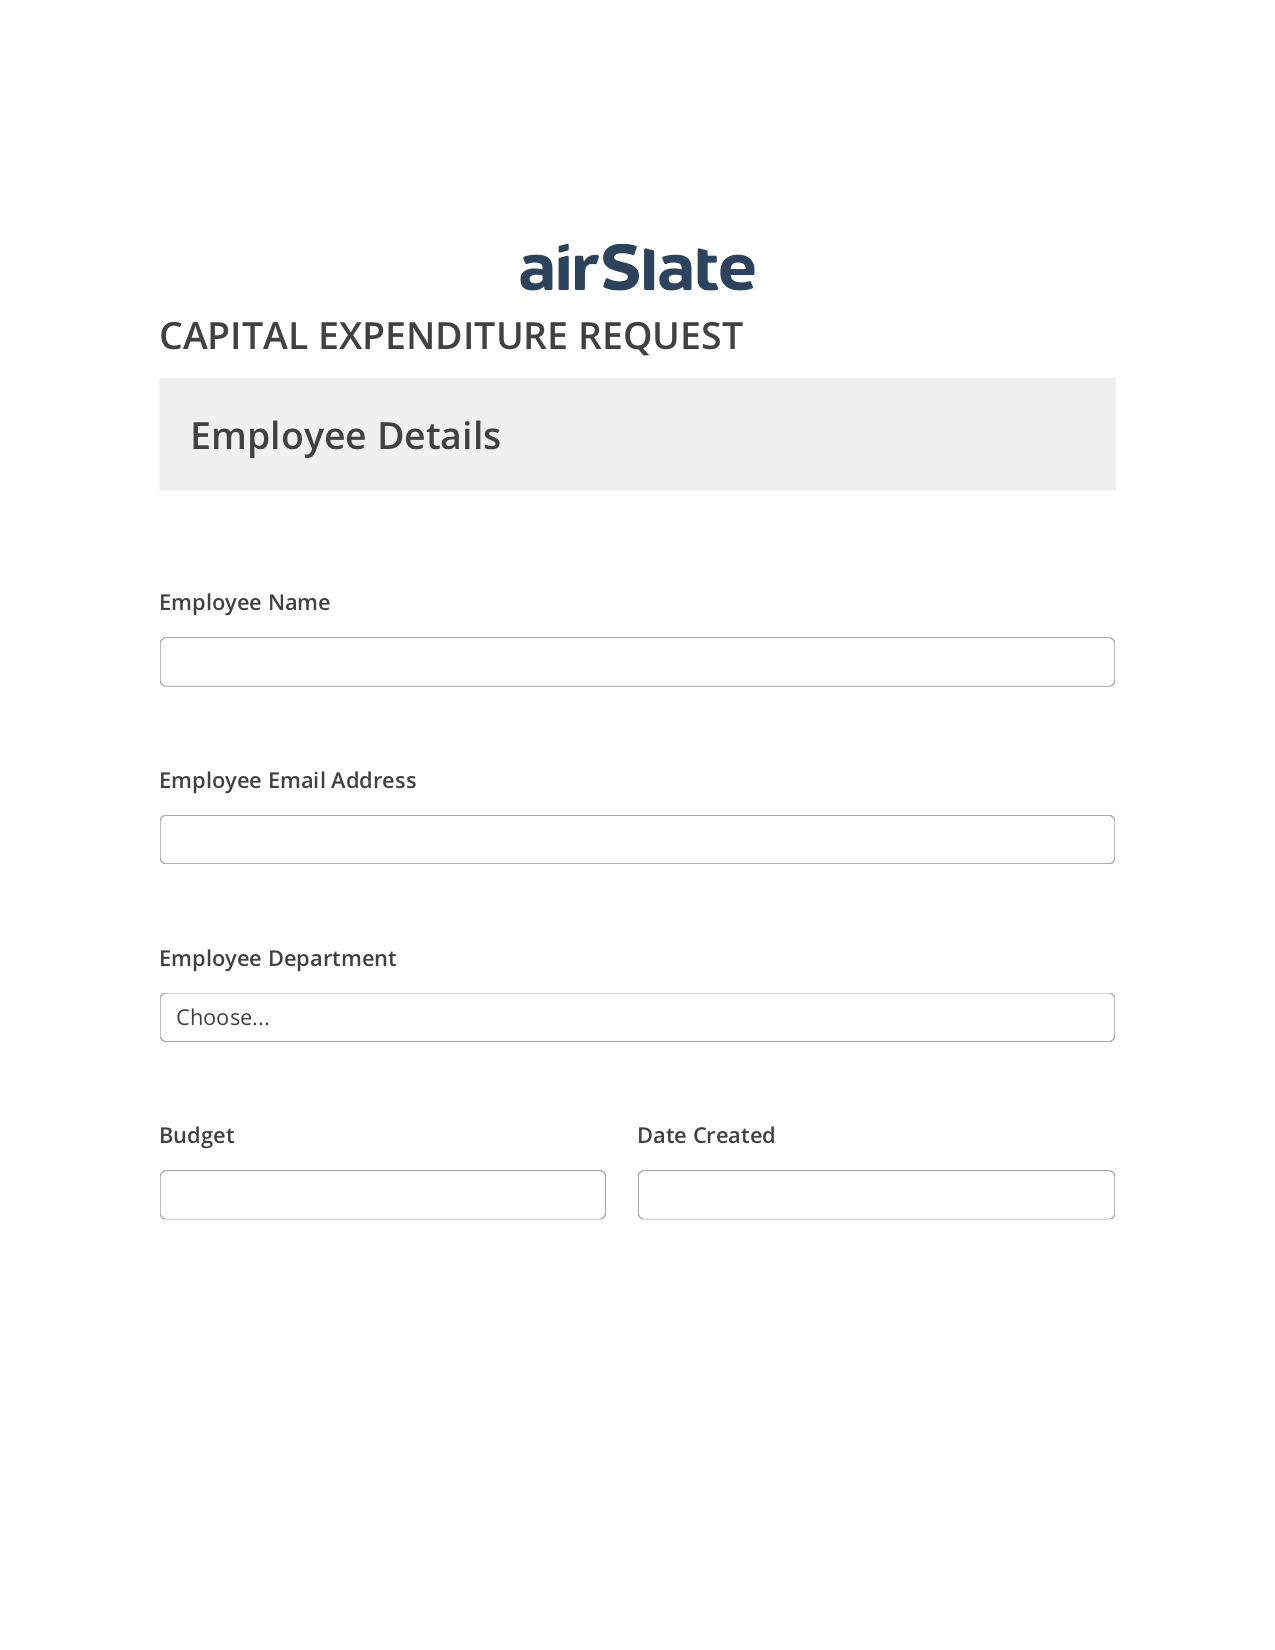 Capital Expenditure Request Approval Workflow Pre-fill Dropdown from Airtable, Add Tags to Slate Bot, Export to NetSuite Bot